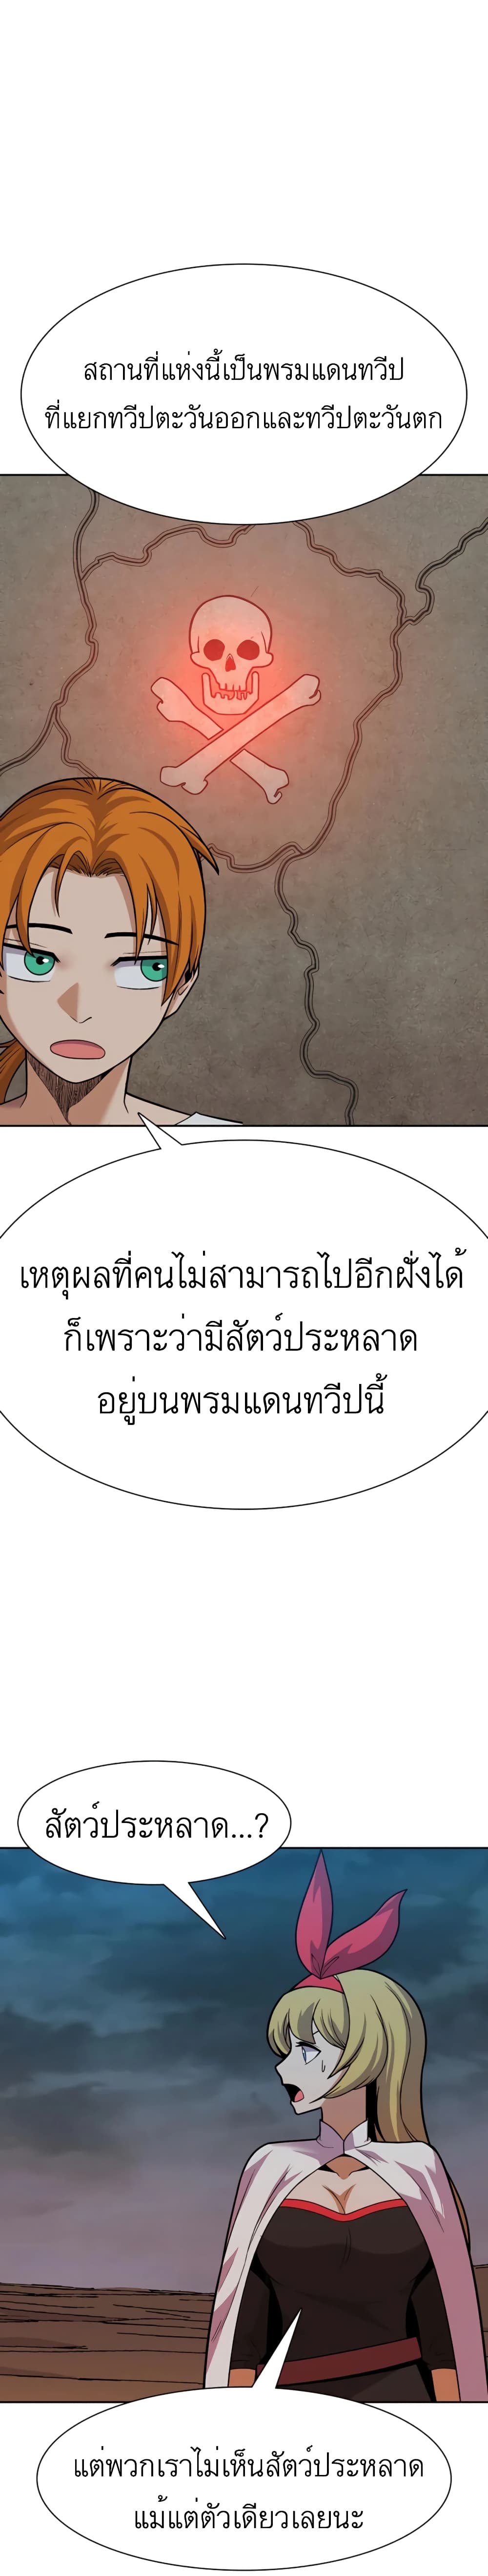 Raising Newbie Heroes In Another World ตอนที่ 24 (10)